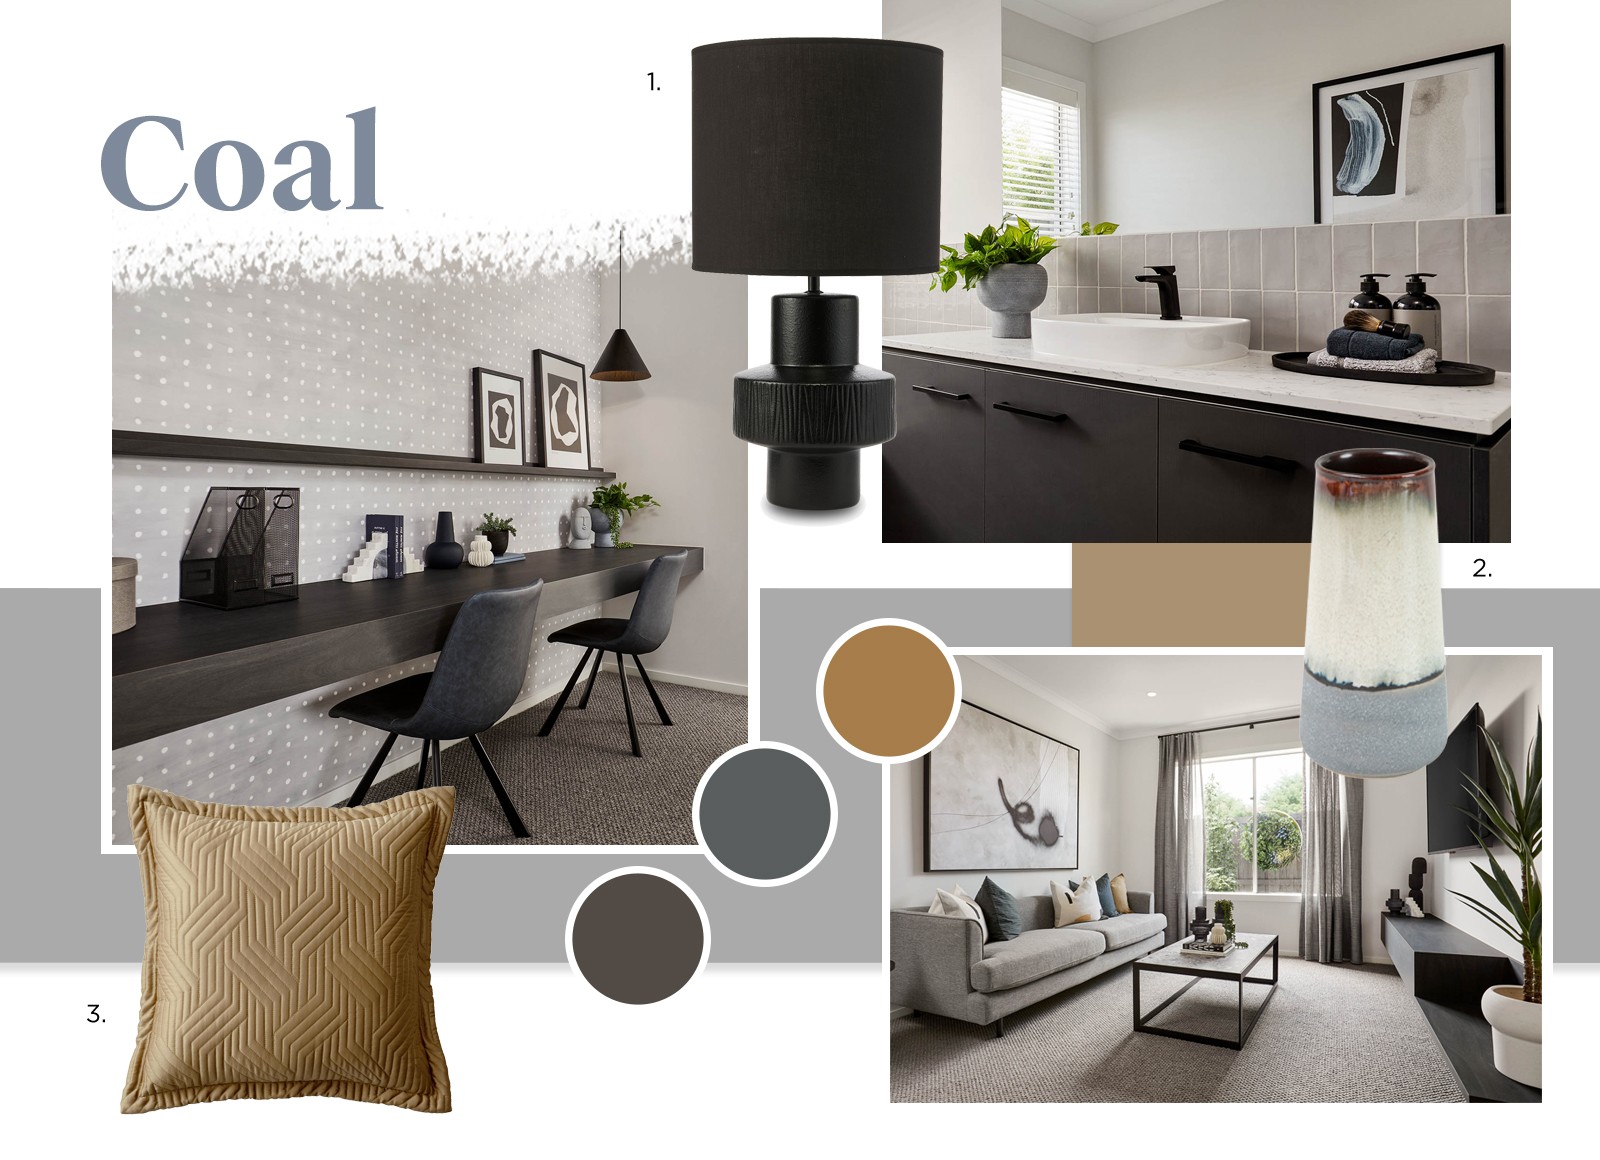 Dial Up the Drama with Our New Coal Look